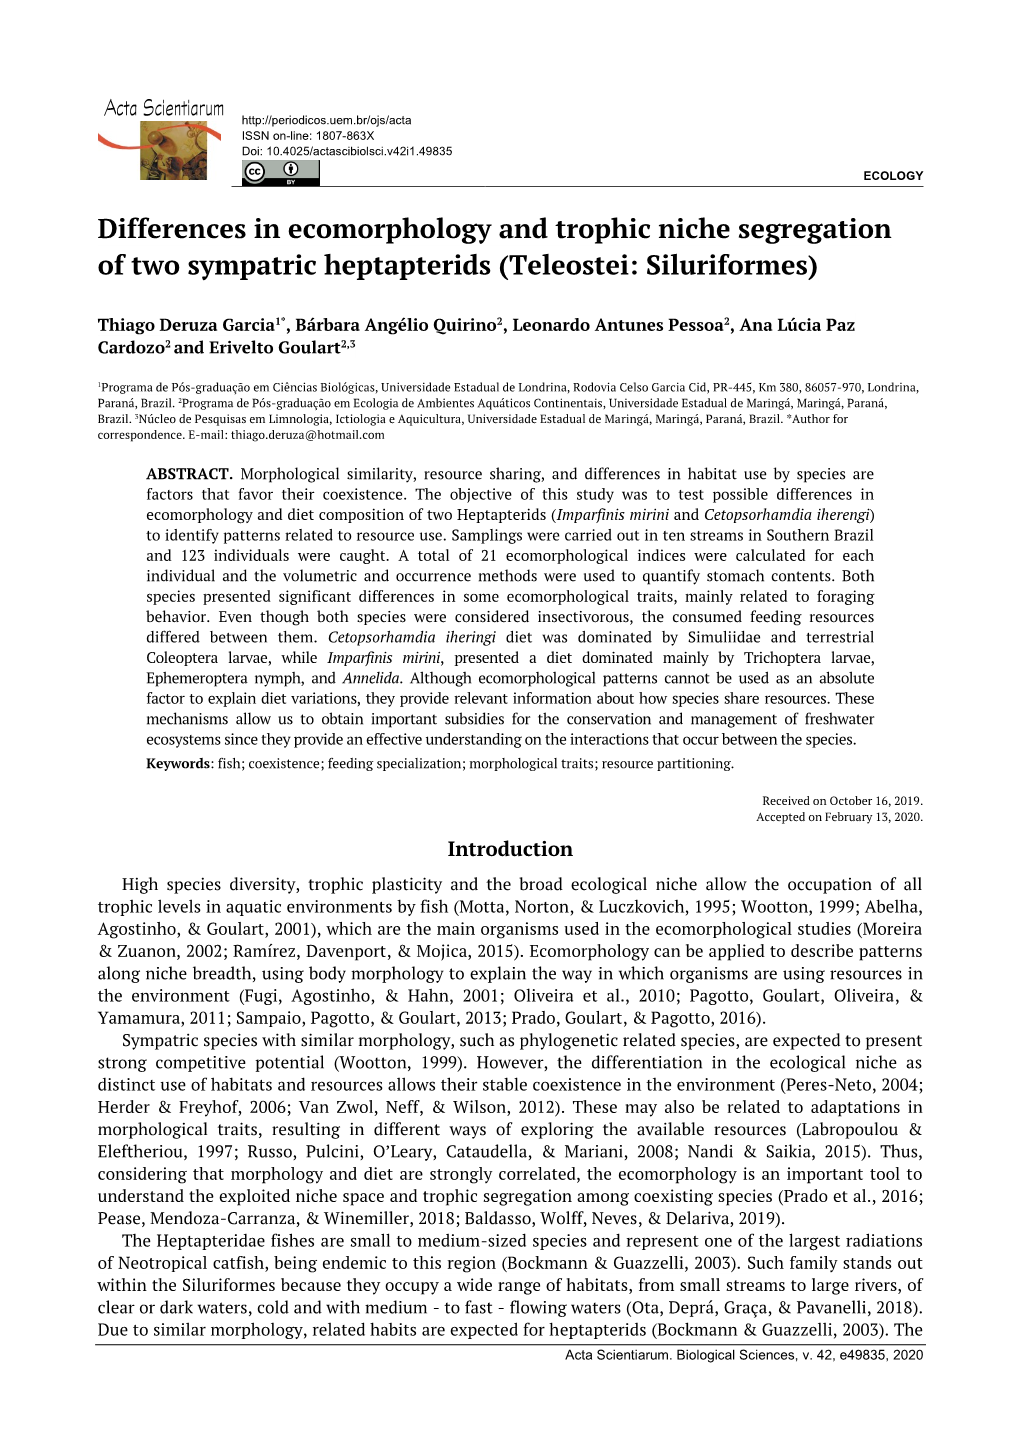 Differences in Ecomorphology and Trophic Niche Segregation of Two Sympatric Heptapterids (Teleostei: Siluriformes)